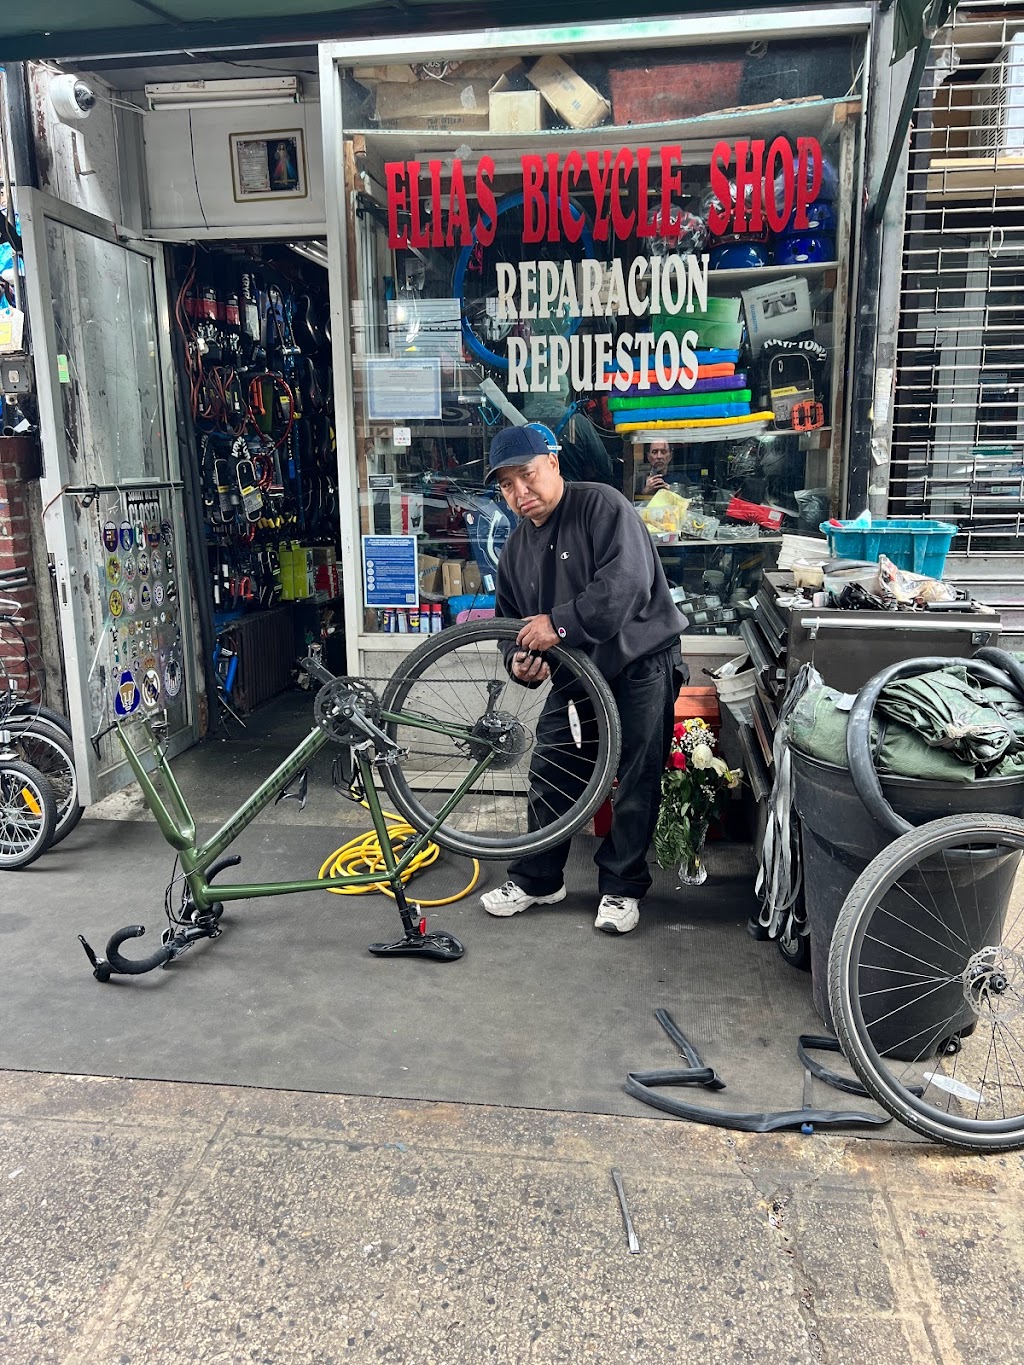 Elias Bicycle Shop | 10495 Roosevelt Ave, Queens, NY 11368 | Phone: (201) 647-5747